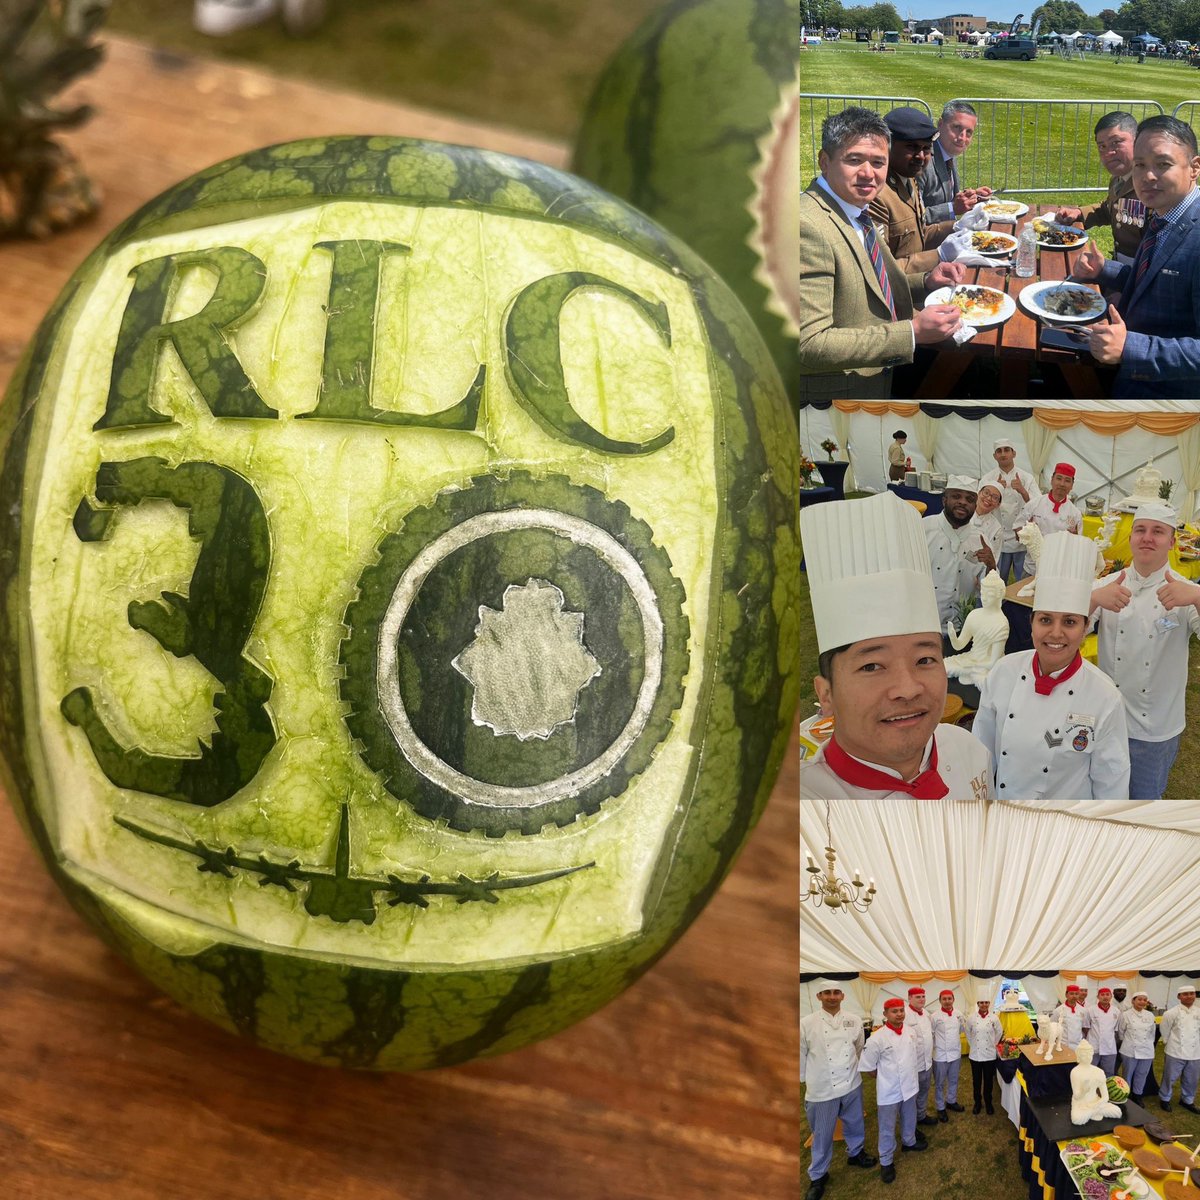 #RLC30 BOSH ! 
Check out our FB or Instagram for coverage of this amazing celebration of our Corps and it’s people 🎉

is.gd/8iuPf1 #WeAreTheChefs #WeAreTheRLC #WeSustain